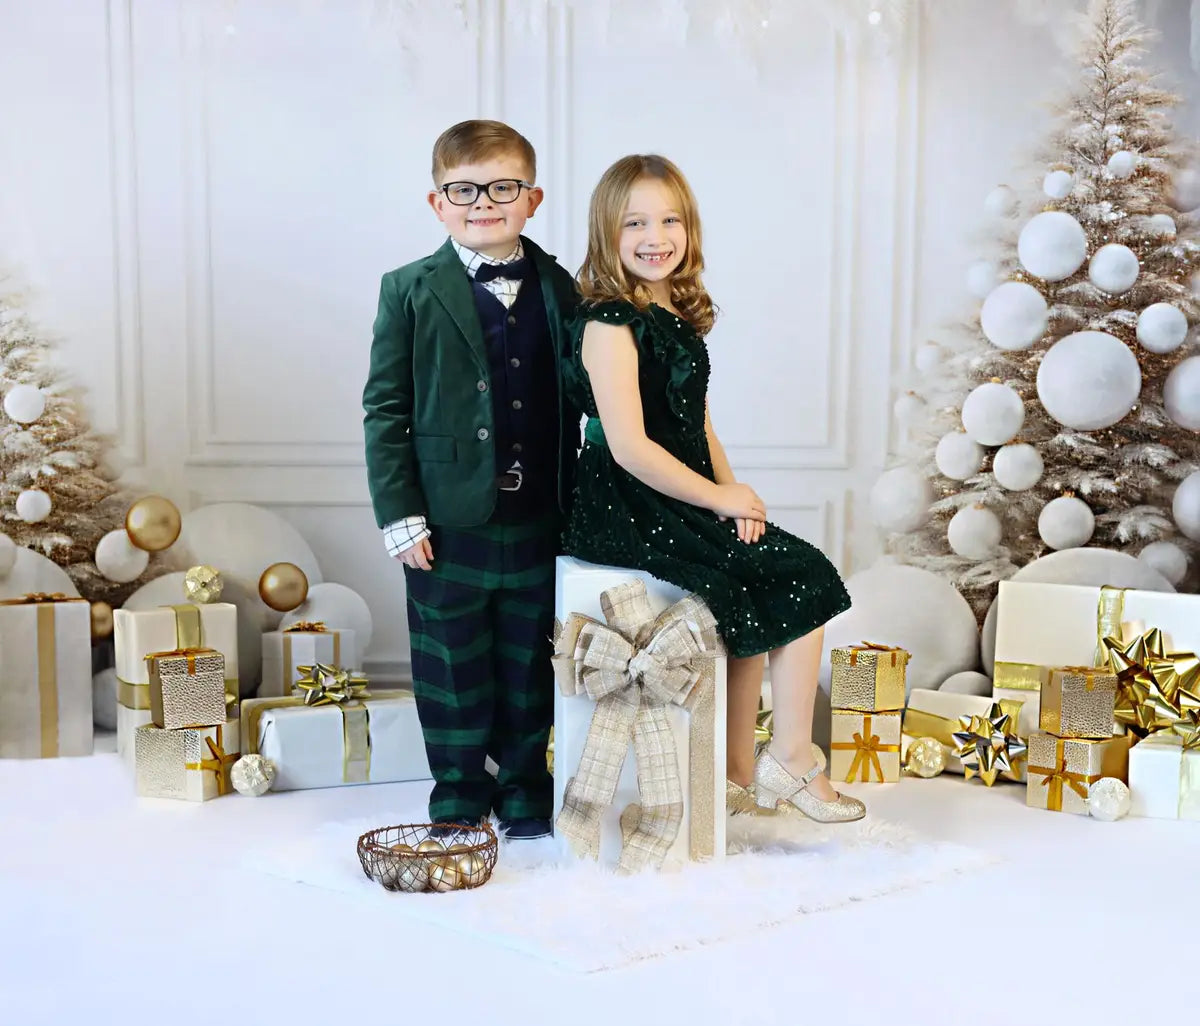 Kate Christmas White Wall Feathers & Gold Backdrop Designed by Lidia Redekopp